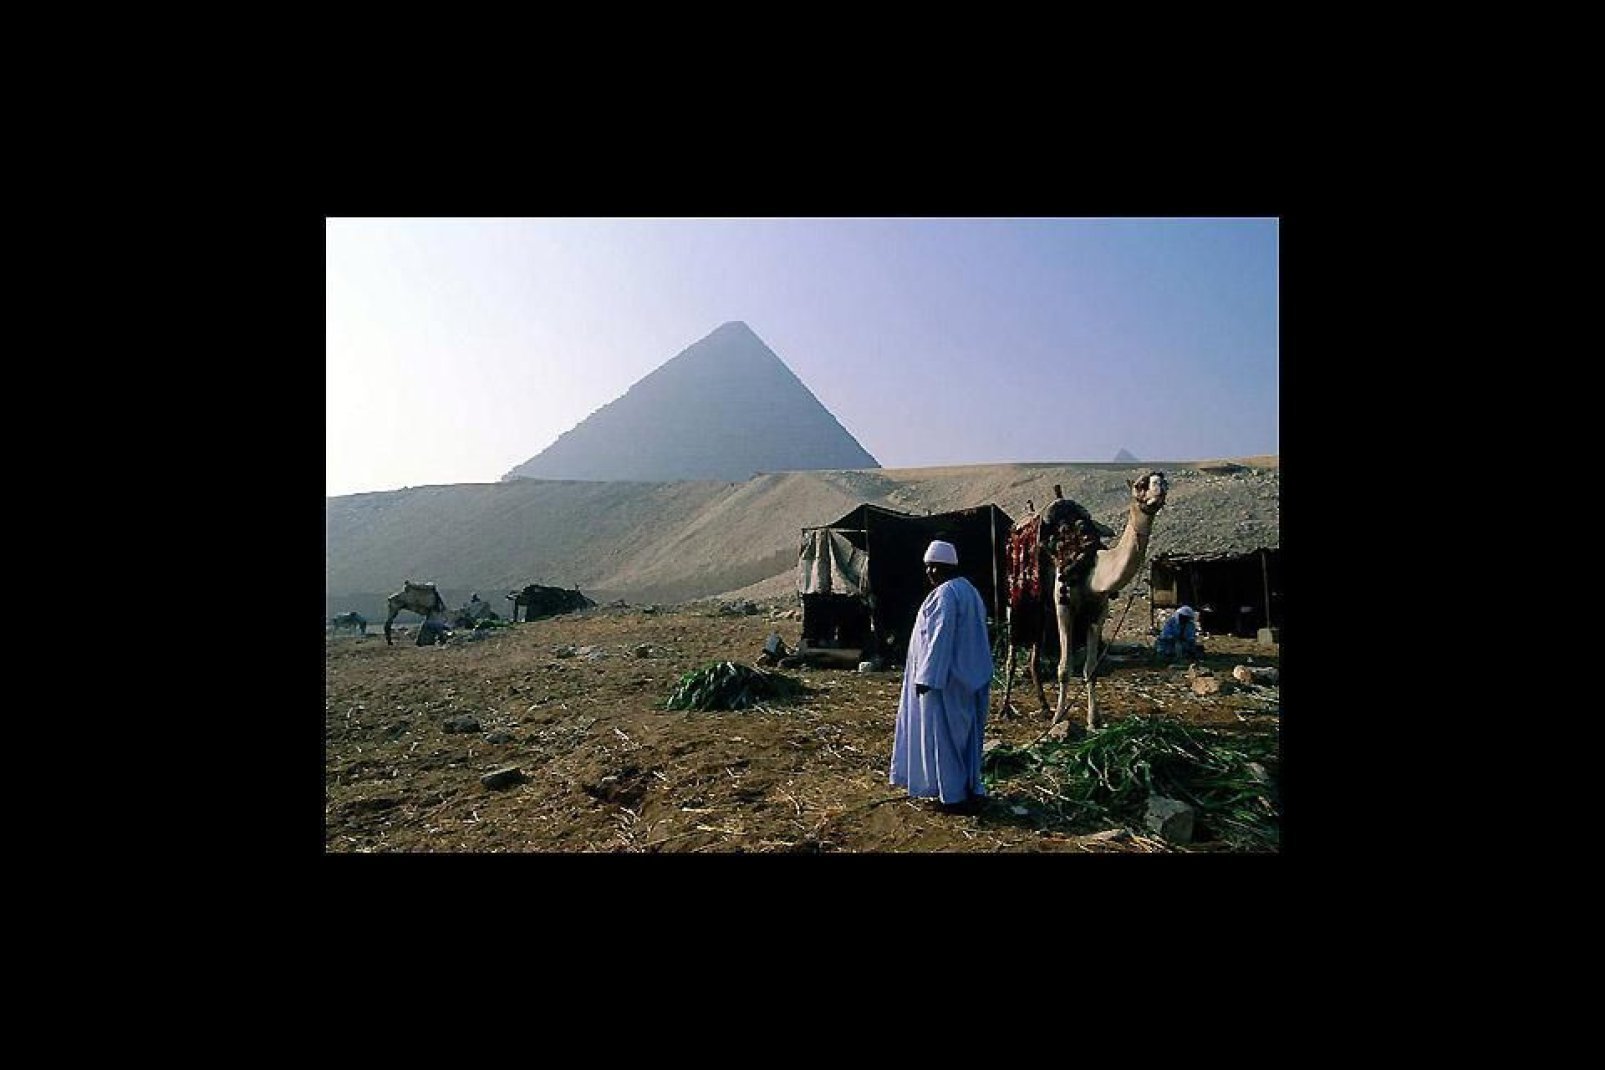 The Pyramids of Giza are a 45-minute drive from the Egyptian capital.